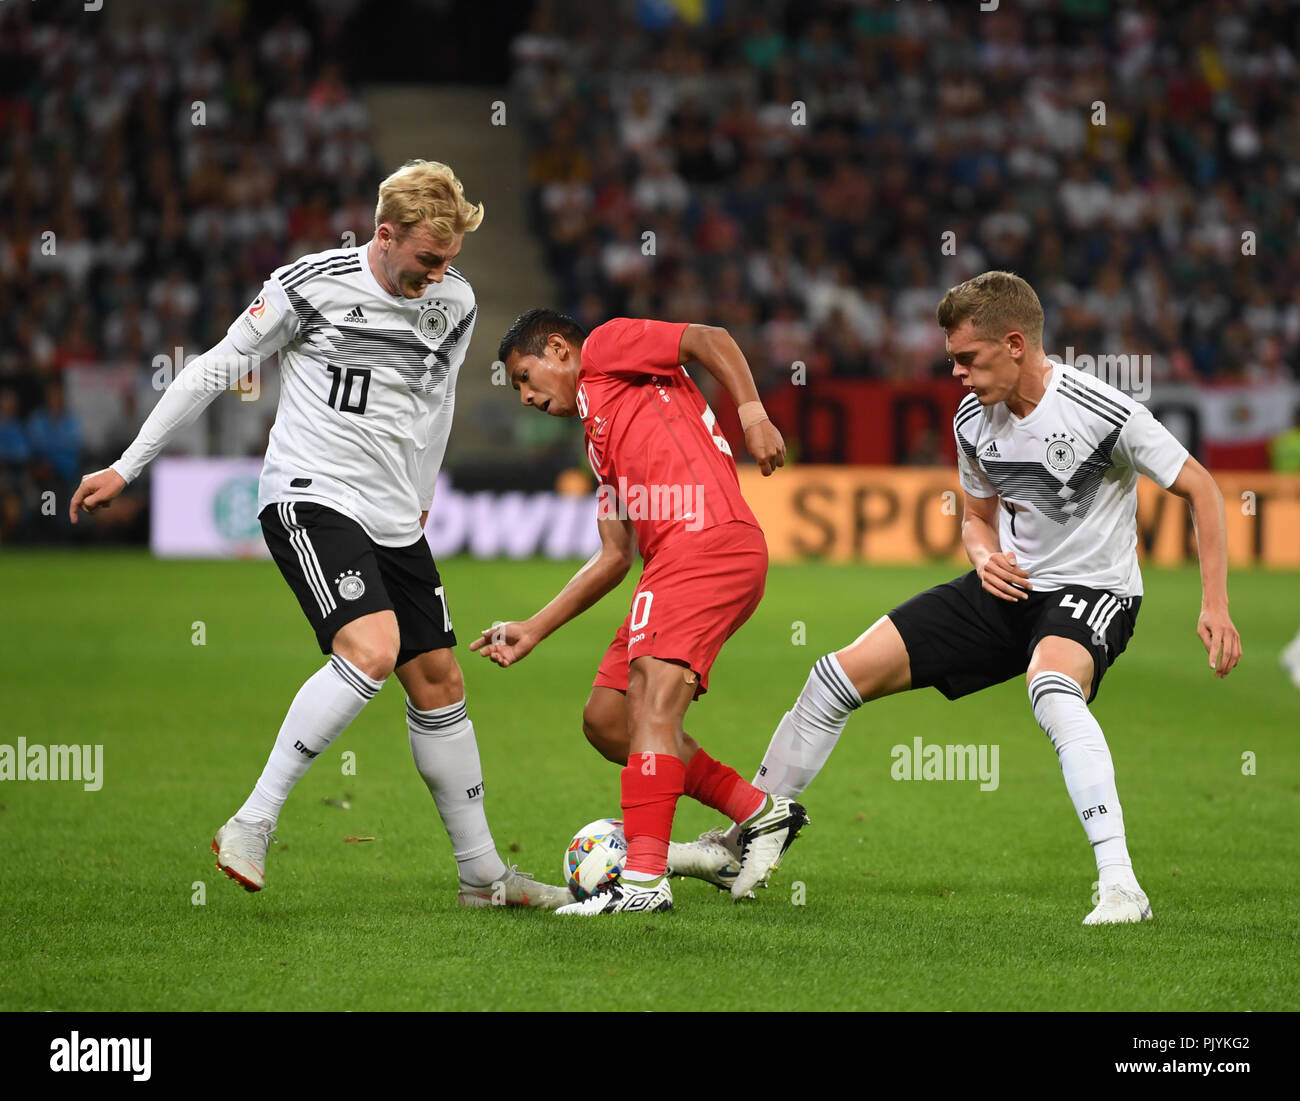 Sinsheim, Germany. 09th Sep, 2018. Soccer Friendly match: Germany vs Peru in the Wirsol Rhein-Neckar-Arena: Julian Brandt (L) from Germany and teammate Matthias Ginter (R) take the ball away from Edison Flores from Peru. Credit: Arne Dedert/dpa/Alamy Live News Stock Photo